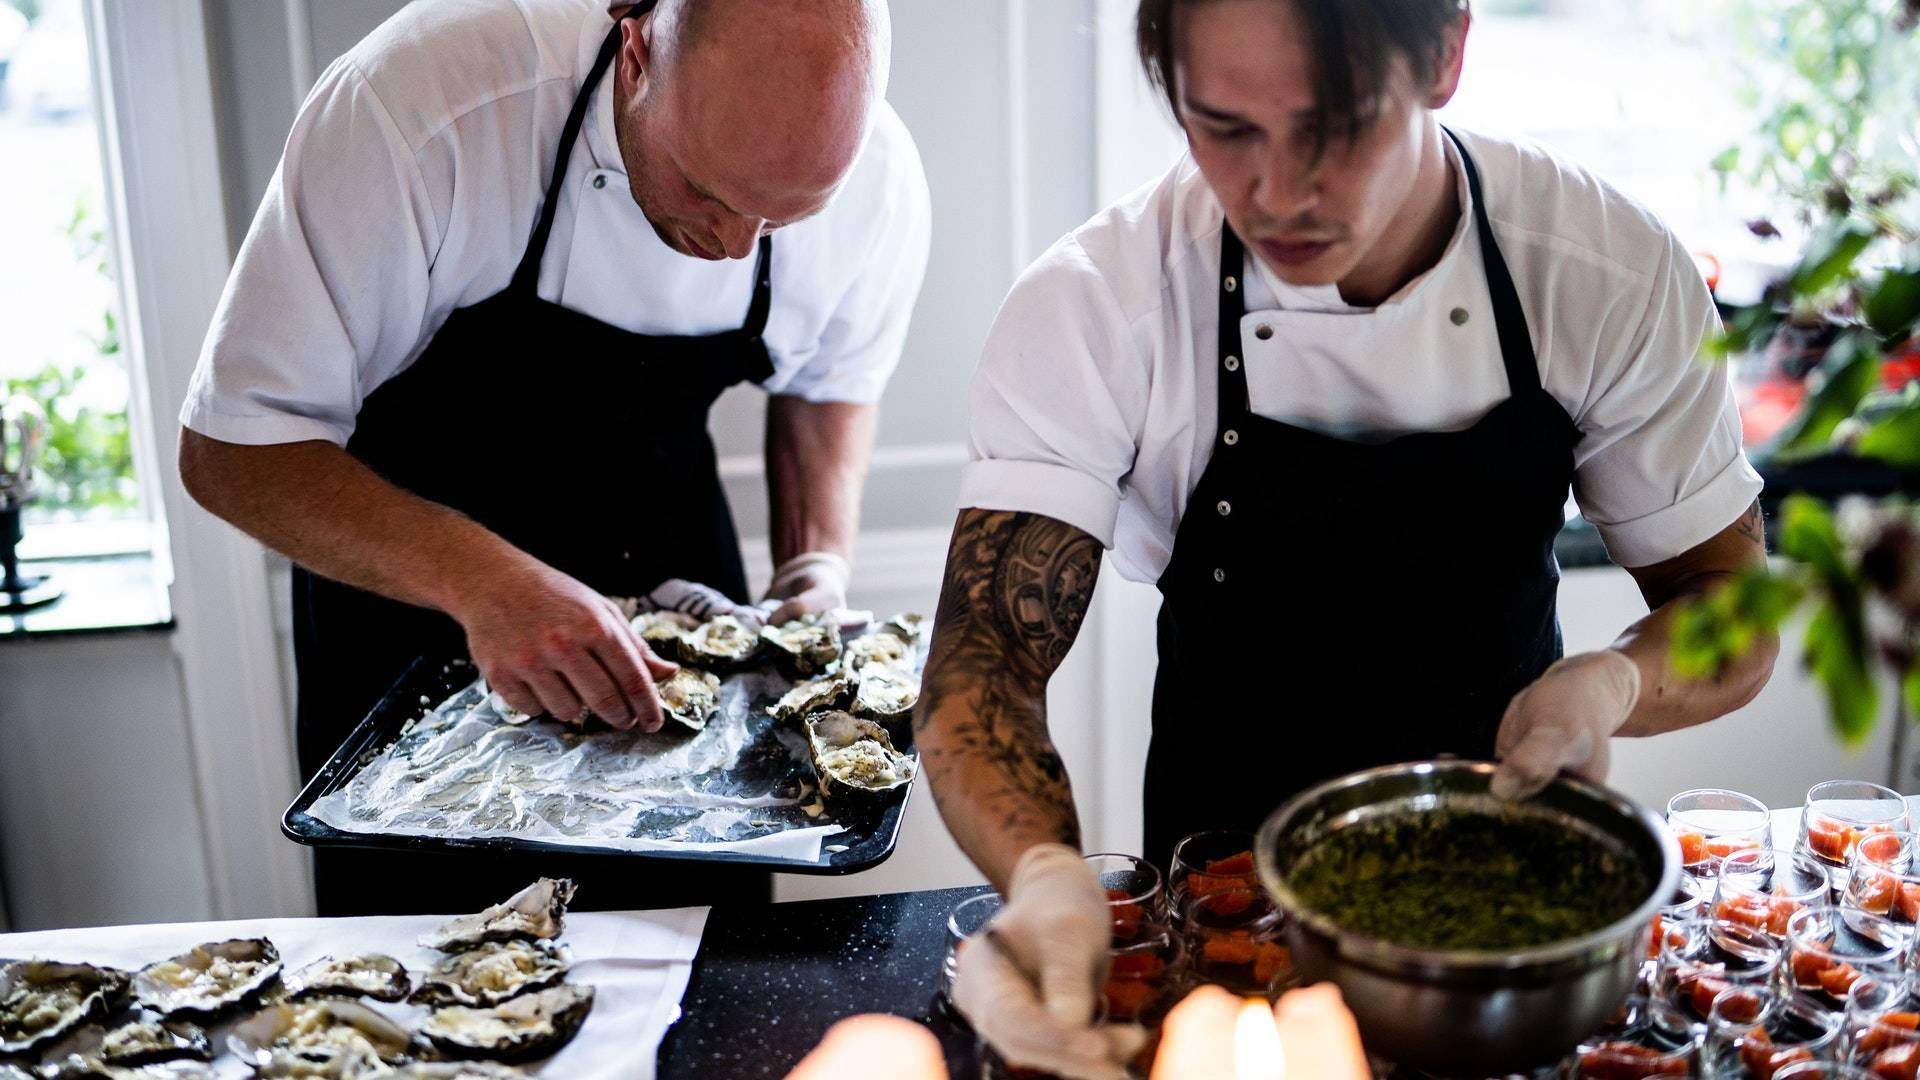 Two men wearing aprons preparing oysters and a sauce. Man in the foreground has tattoos